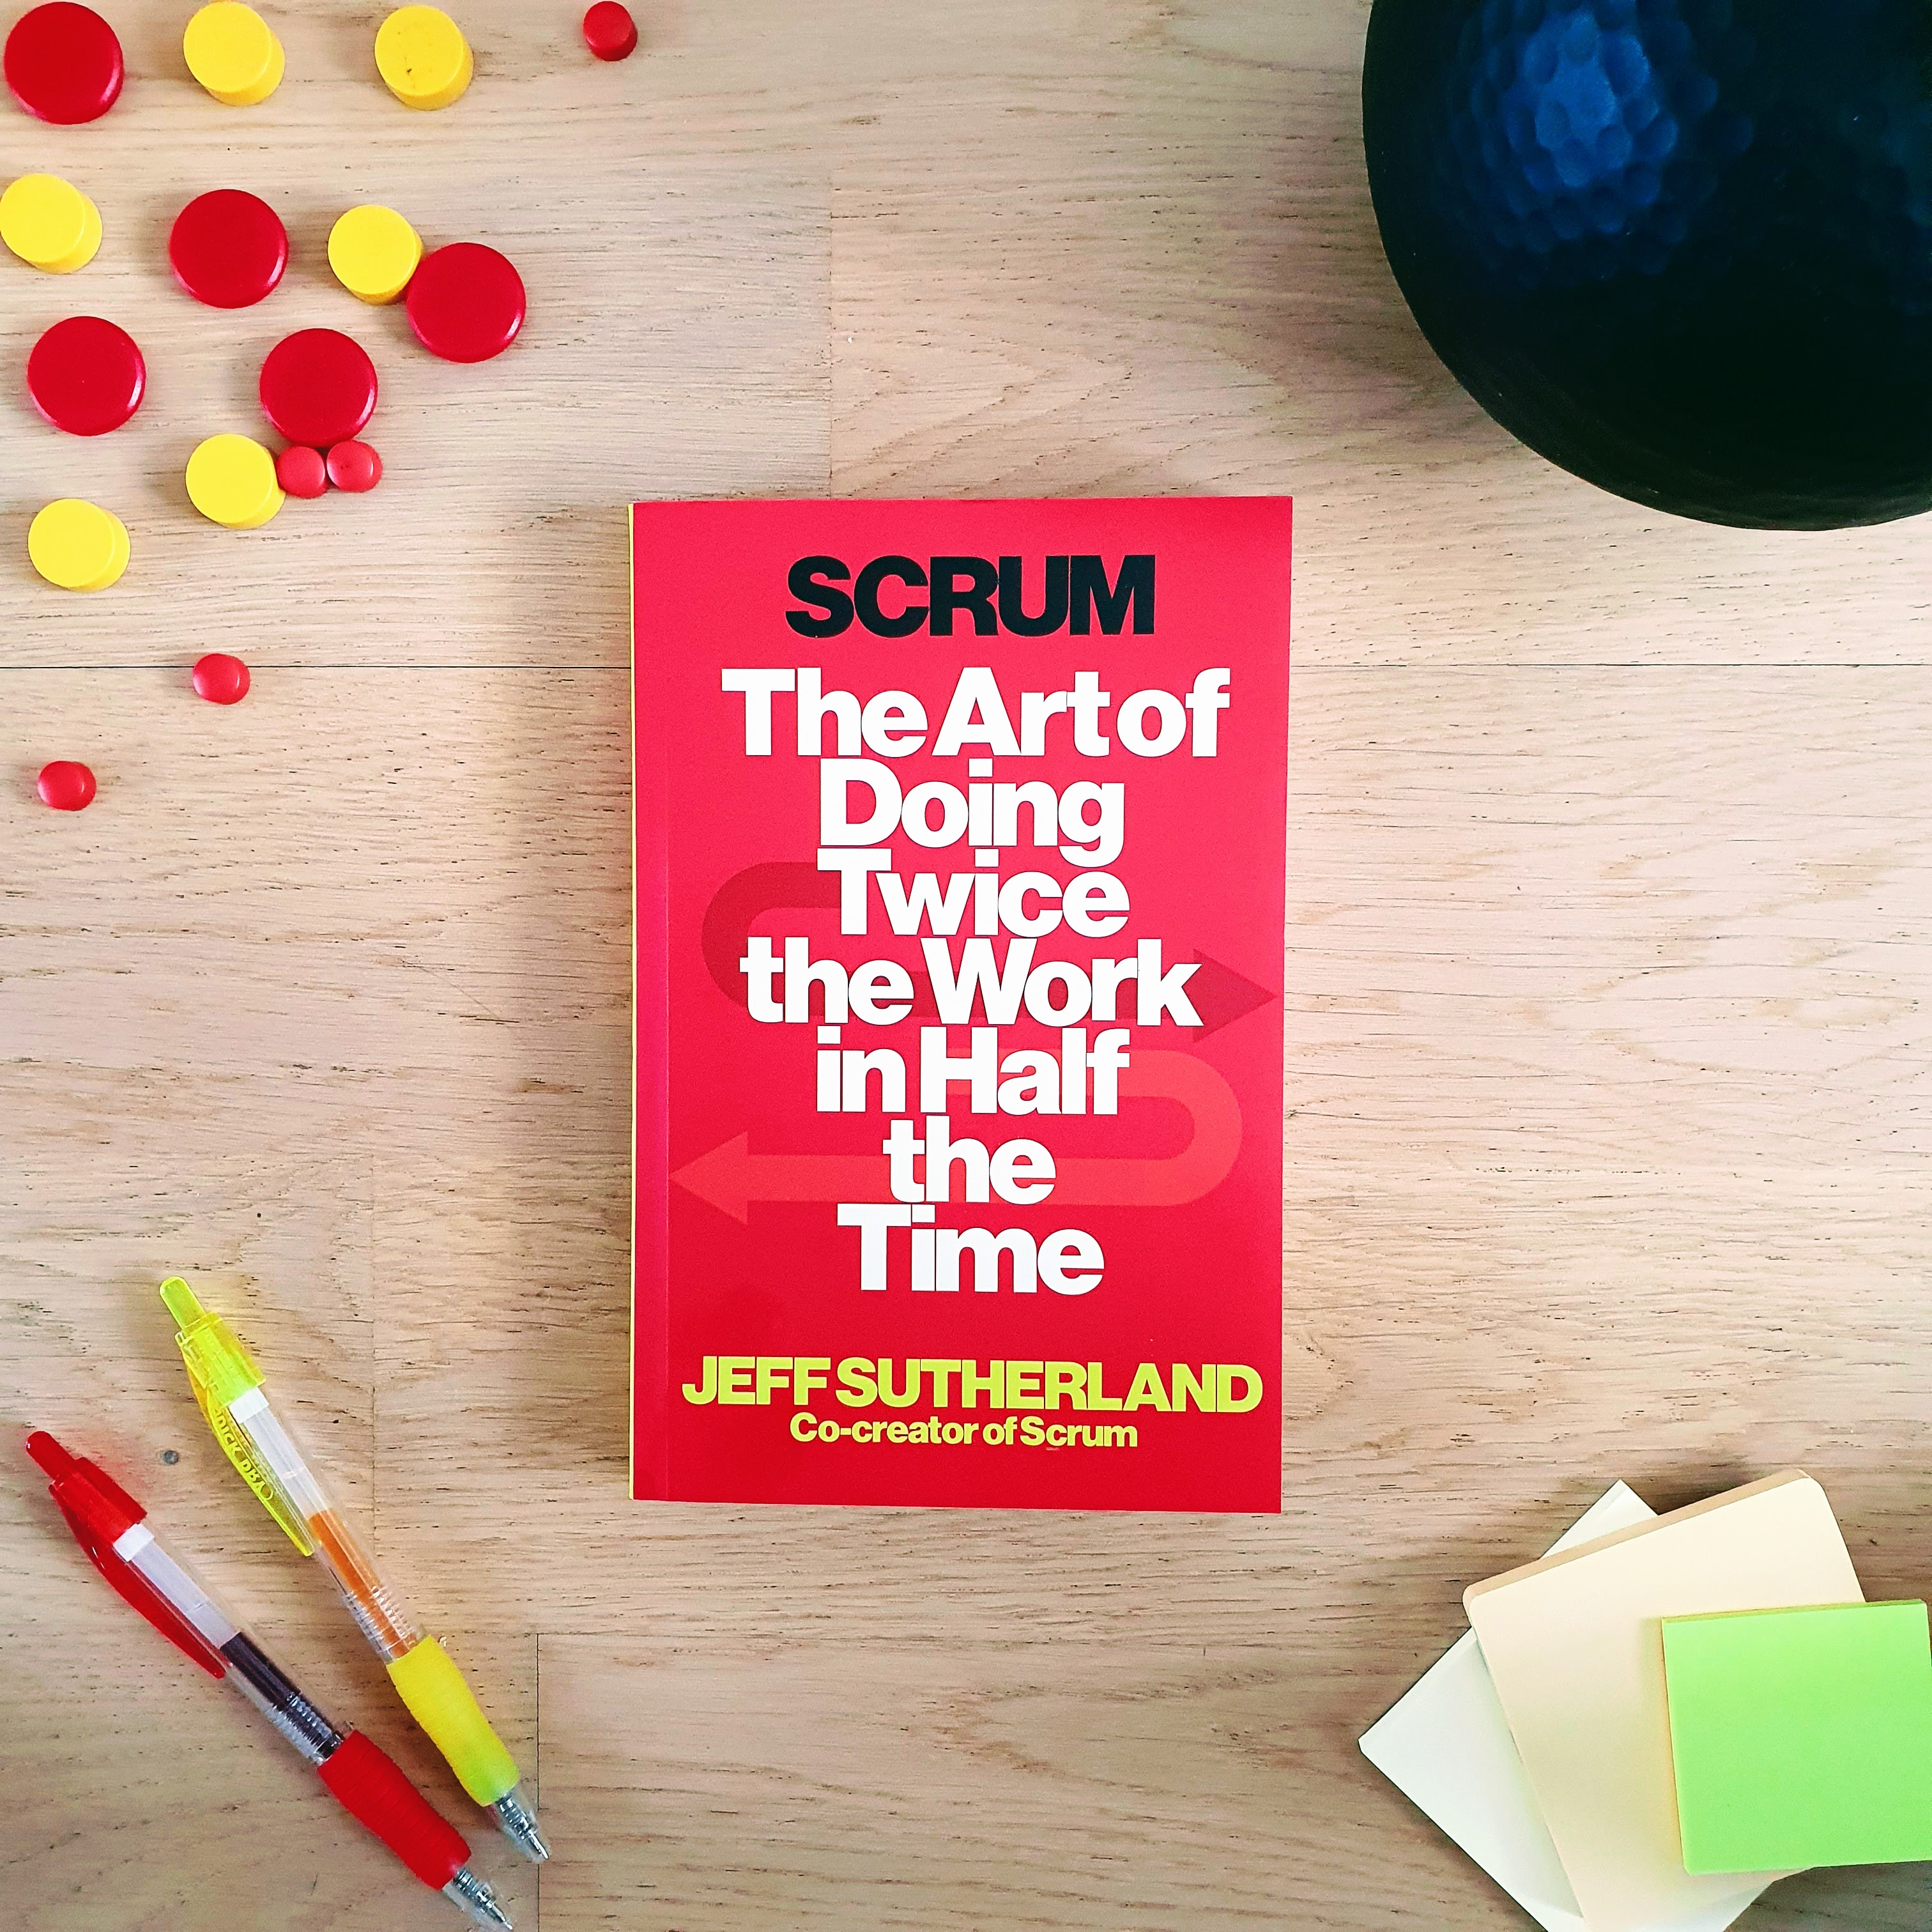 Scrum: The Art of Doing Twice the Work in Half the Time - Jeff Sutherland